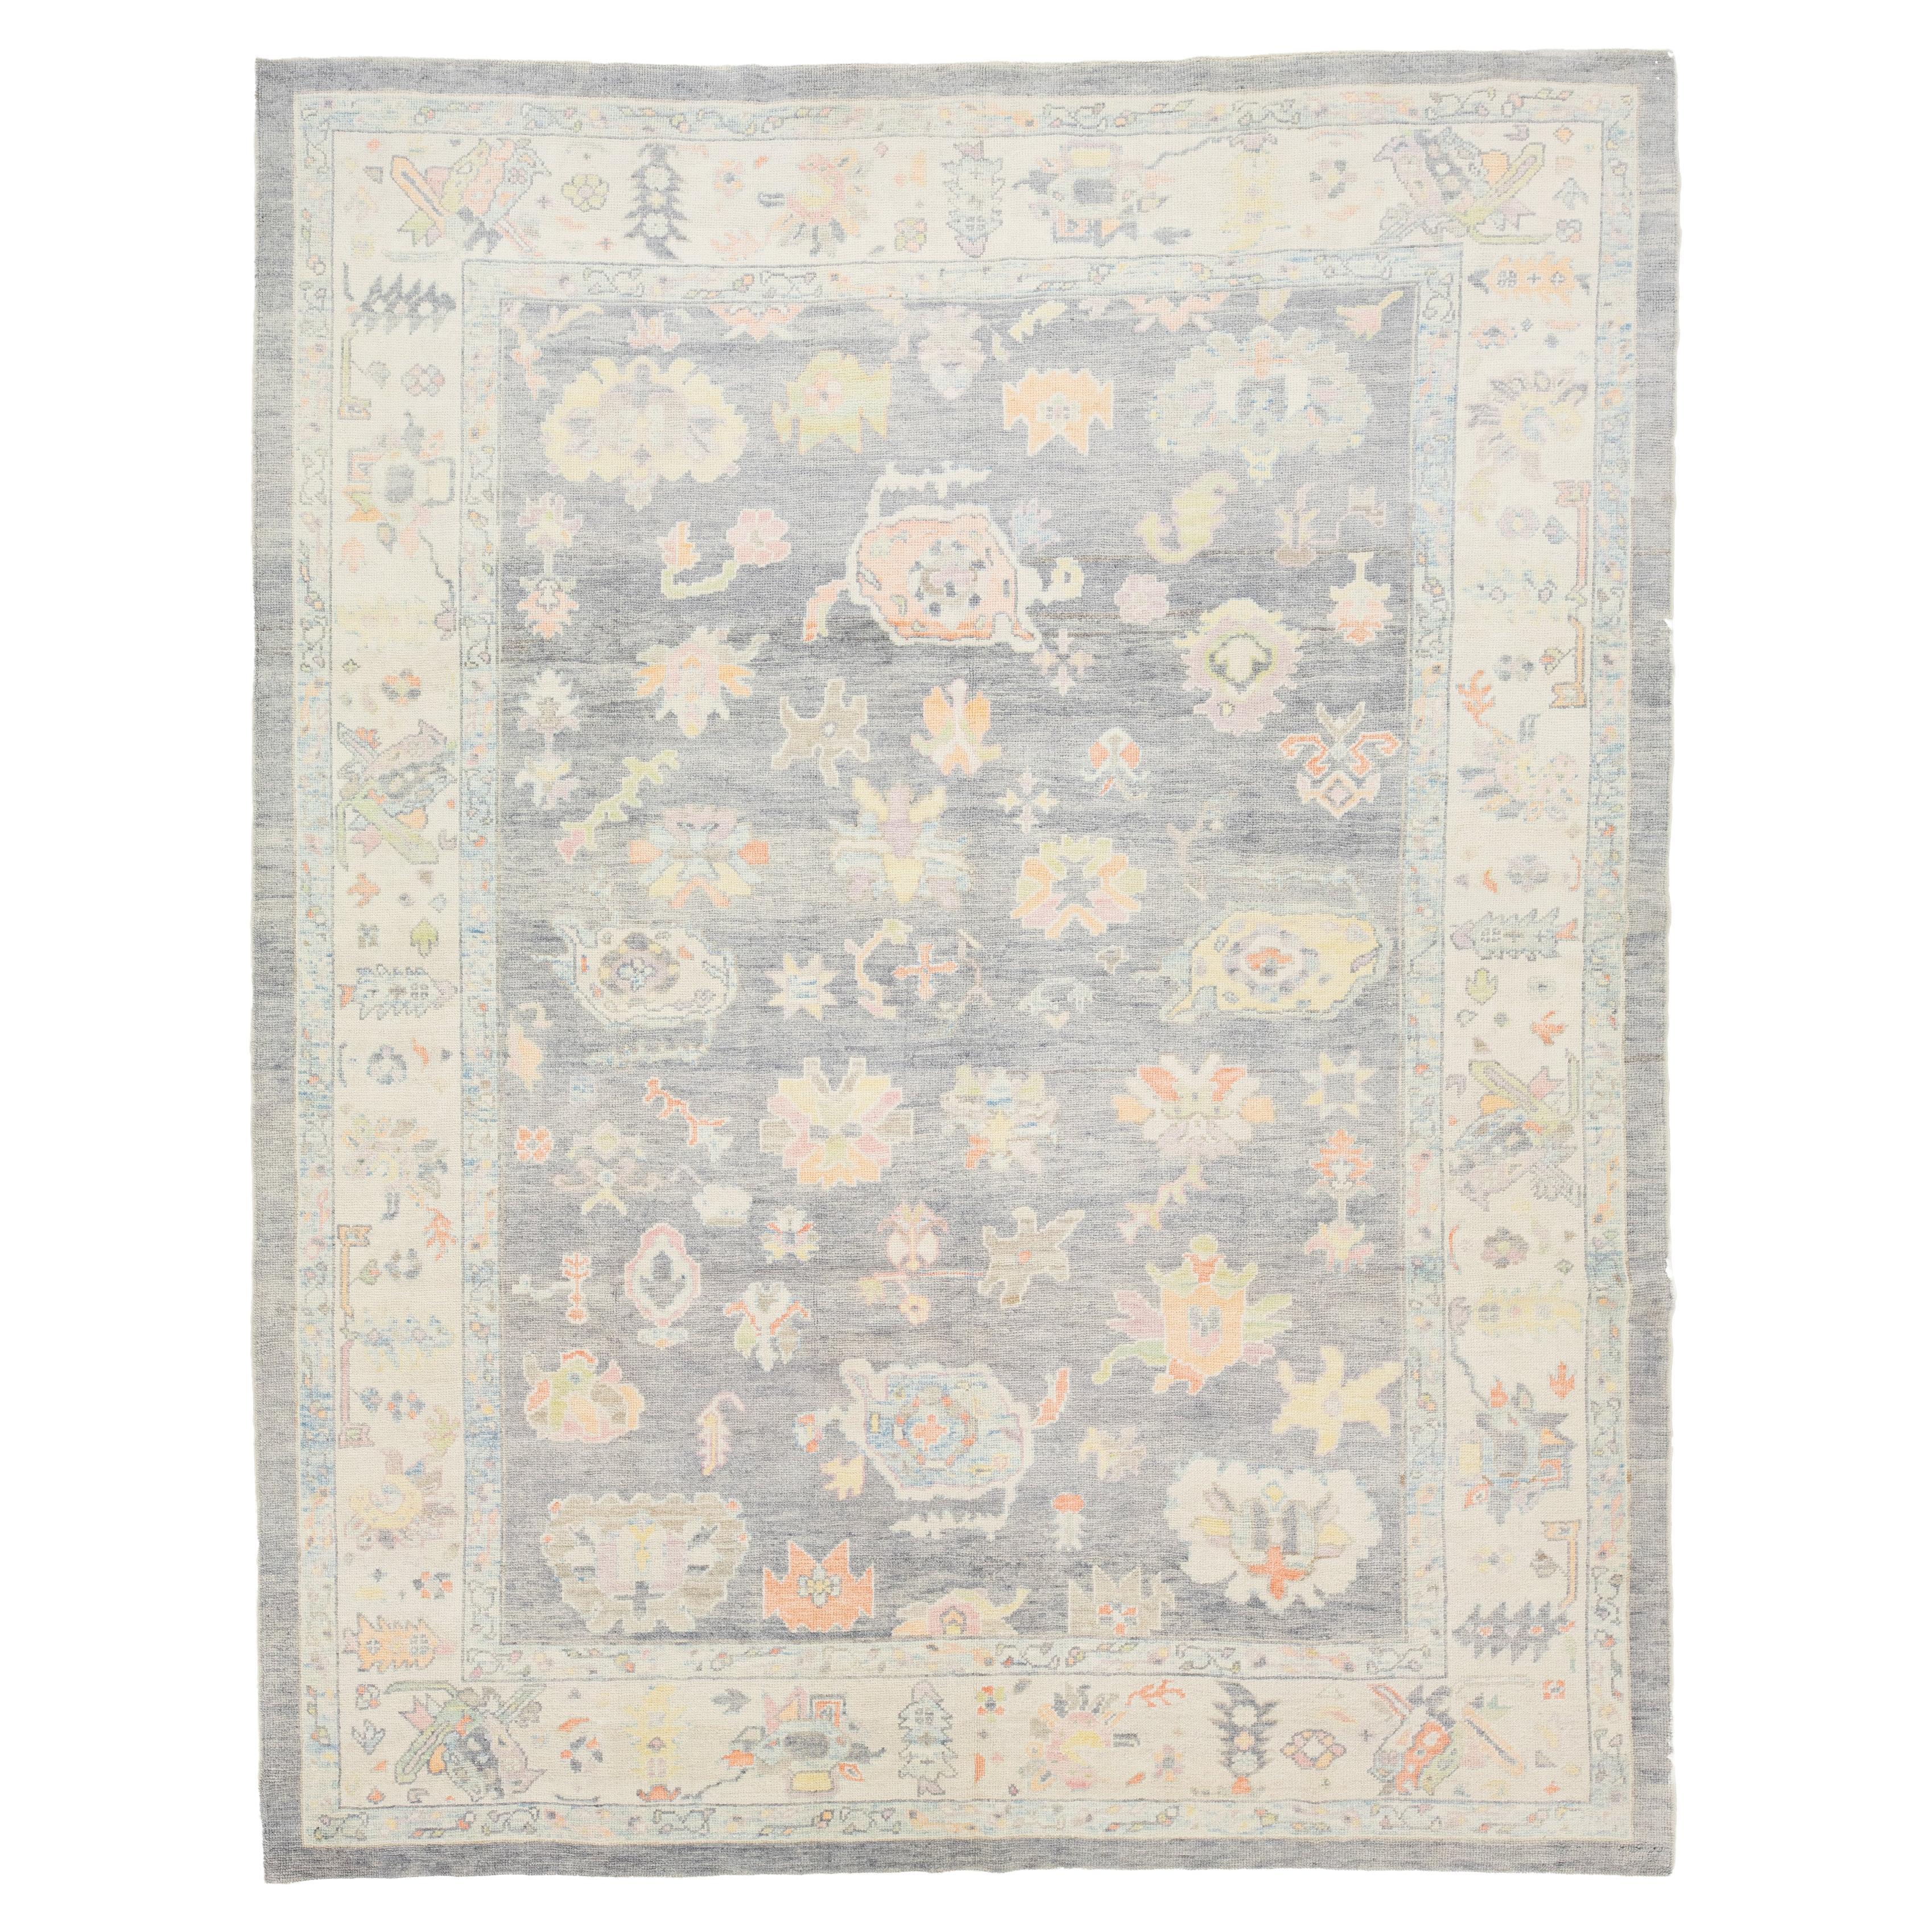 ROOMS Contemporary Turkish Oushak Floral Wool Rug In Gray